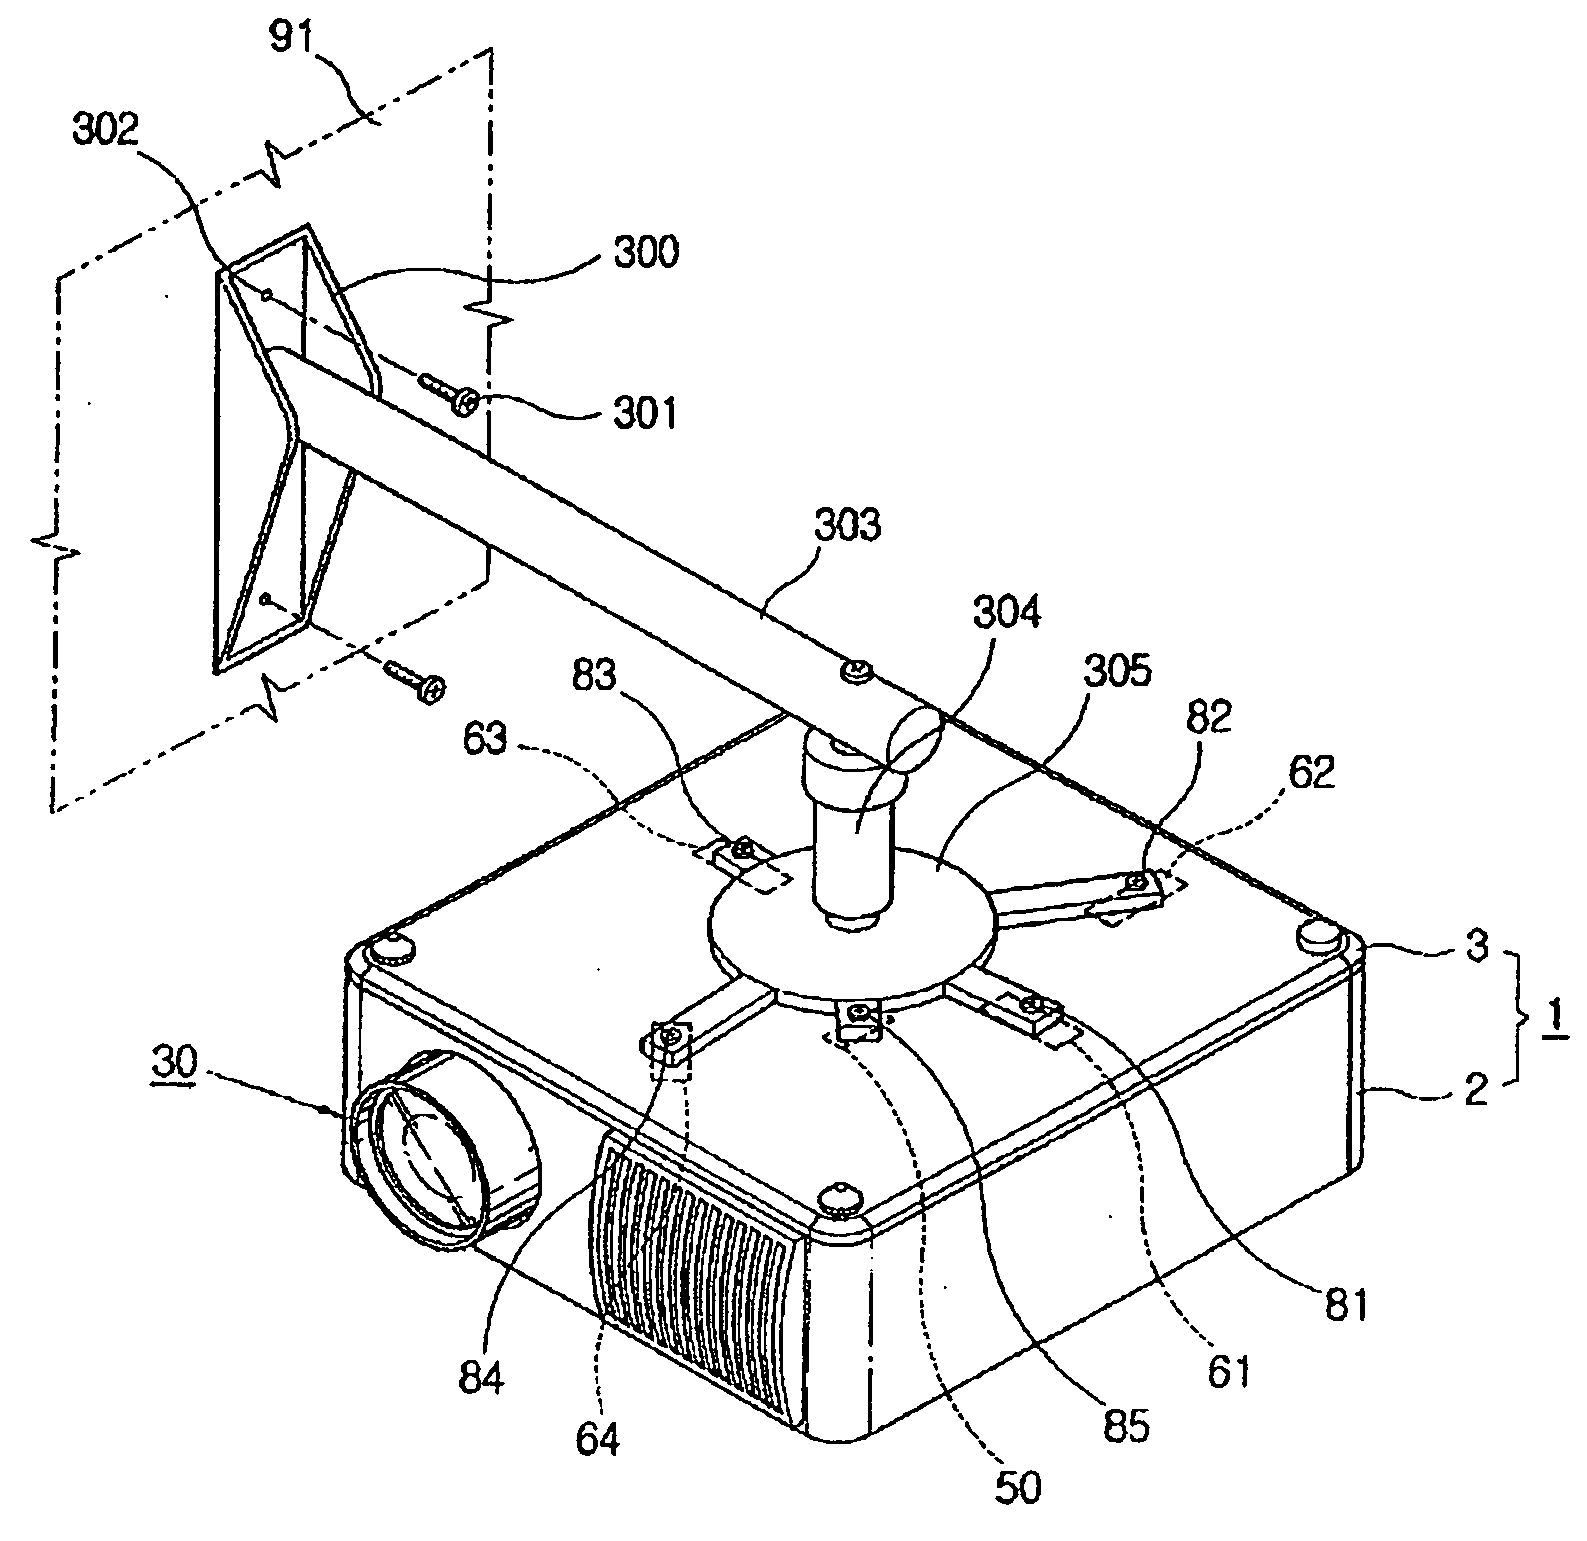 Image projecting apparatus